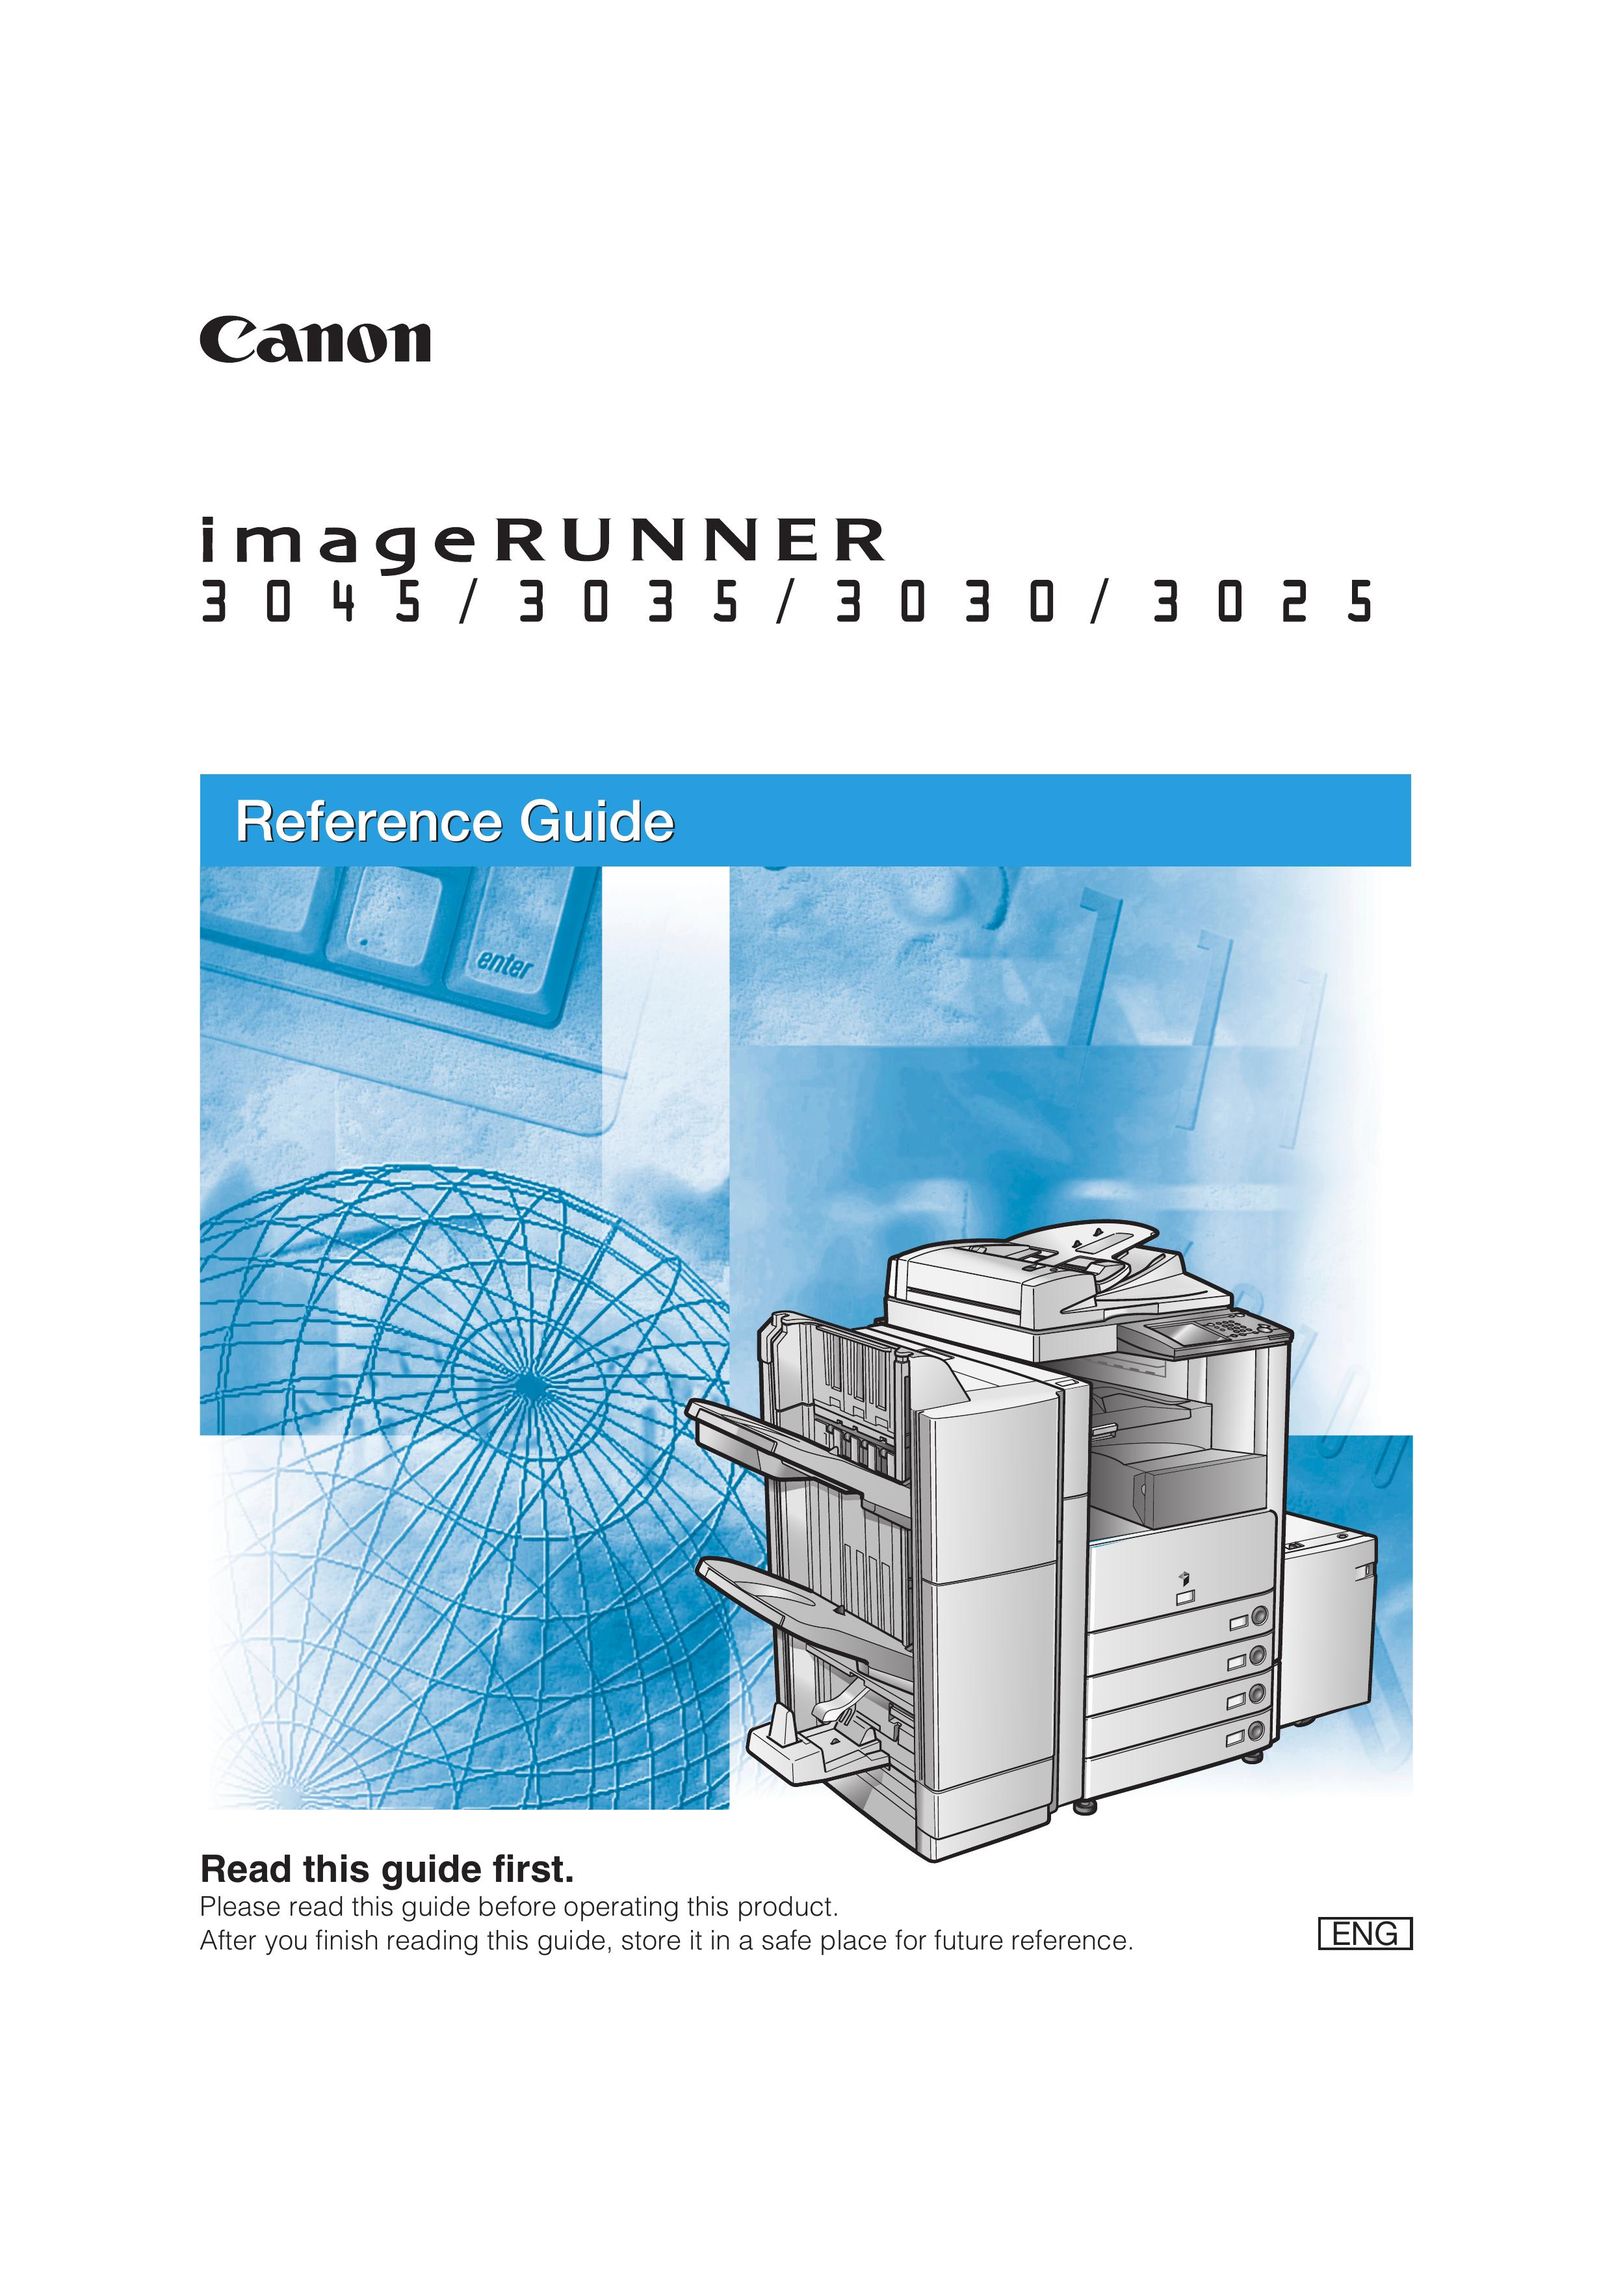 Canon 3045 All in One Printer User Manual